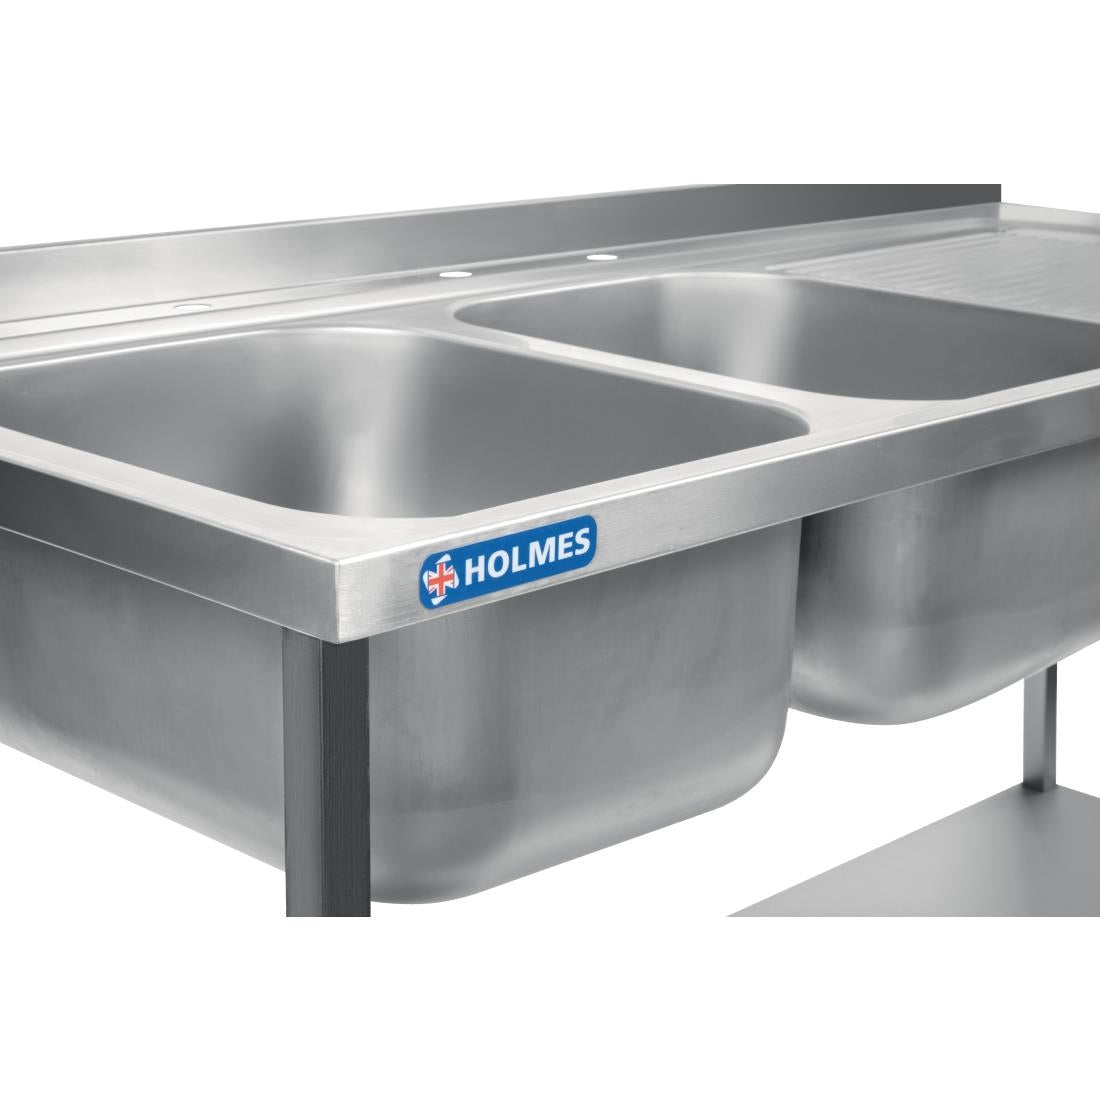 DR392 Holmes Fully Assembled Stainless Steel Sink Right Hand Drainer 1500mm JD Catering Equipment Solutions Ltd